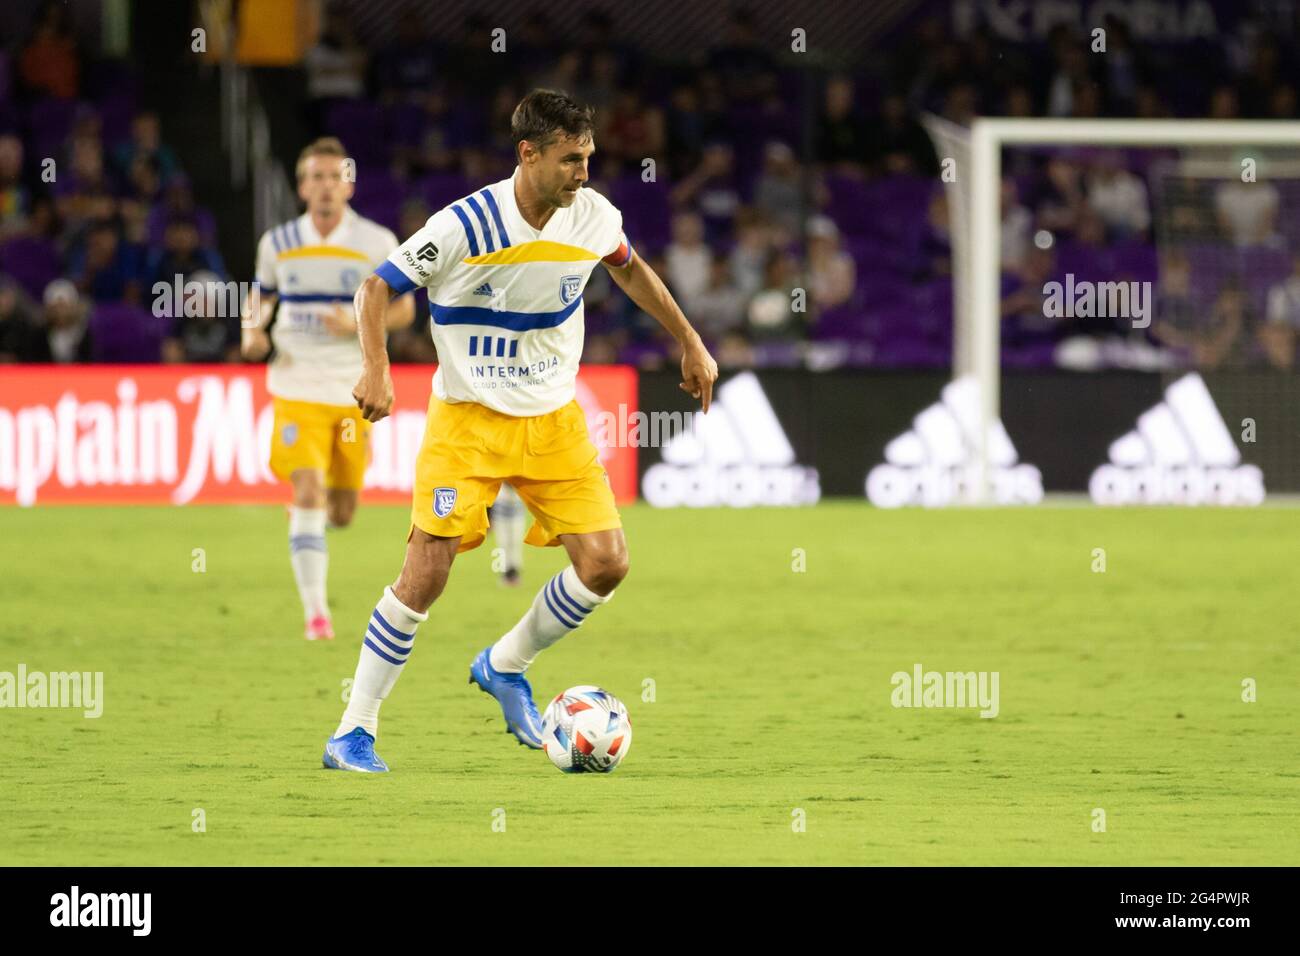 Orlando, United States. 23rd June, 2021. Chris Wondolowski (8 San Jose Earthquakes) prepares to pass the ball during the Major League Soccer game between Orlando City and San Jose Earthquakes at Exploria Stadium in Orlando, Florida. NO COMMERCIAL USAGE. Credit: SPP Sport Press Photo. /Alamy Live News Stock Photo